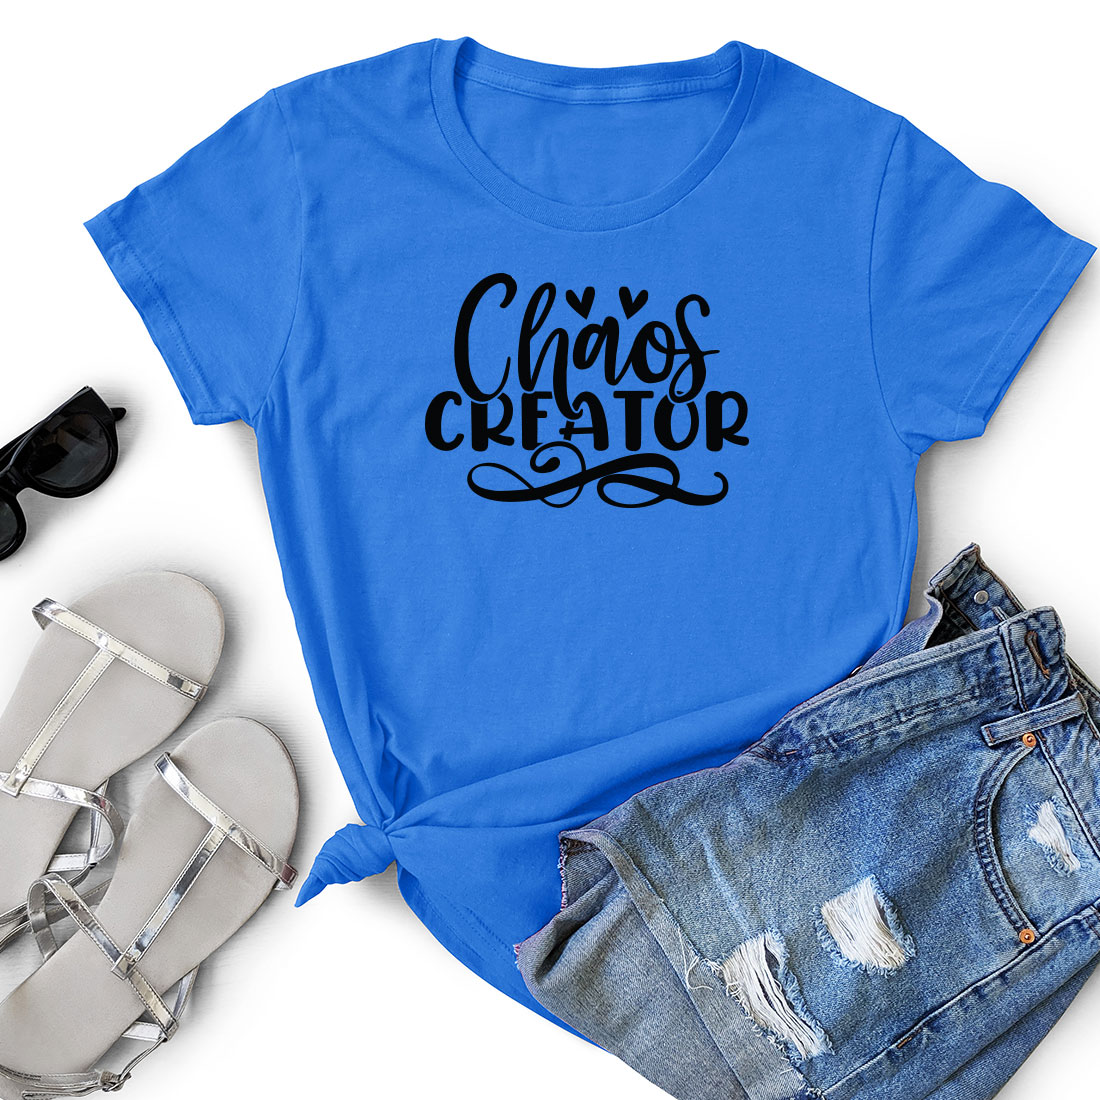 Blue shirt that says chaos creator next to a pair of shorts.